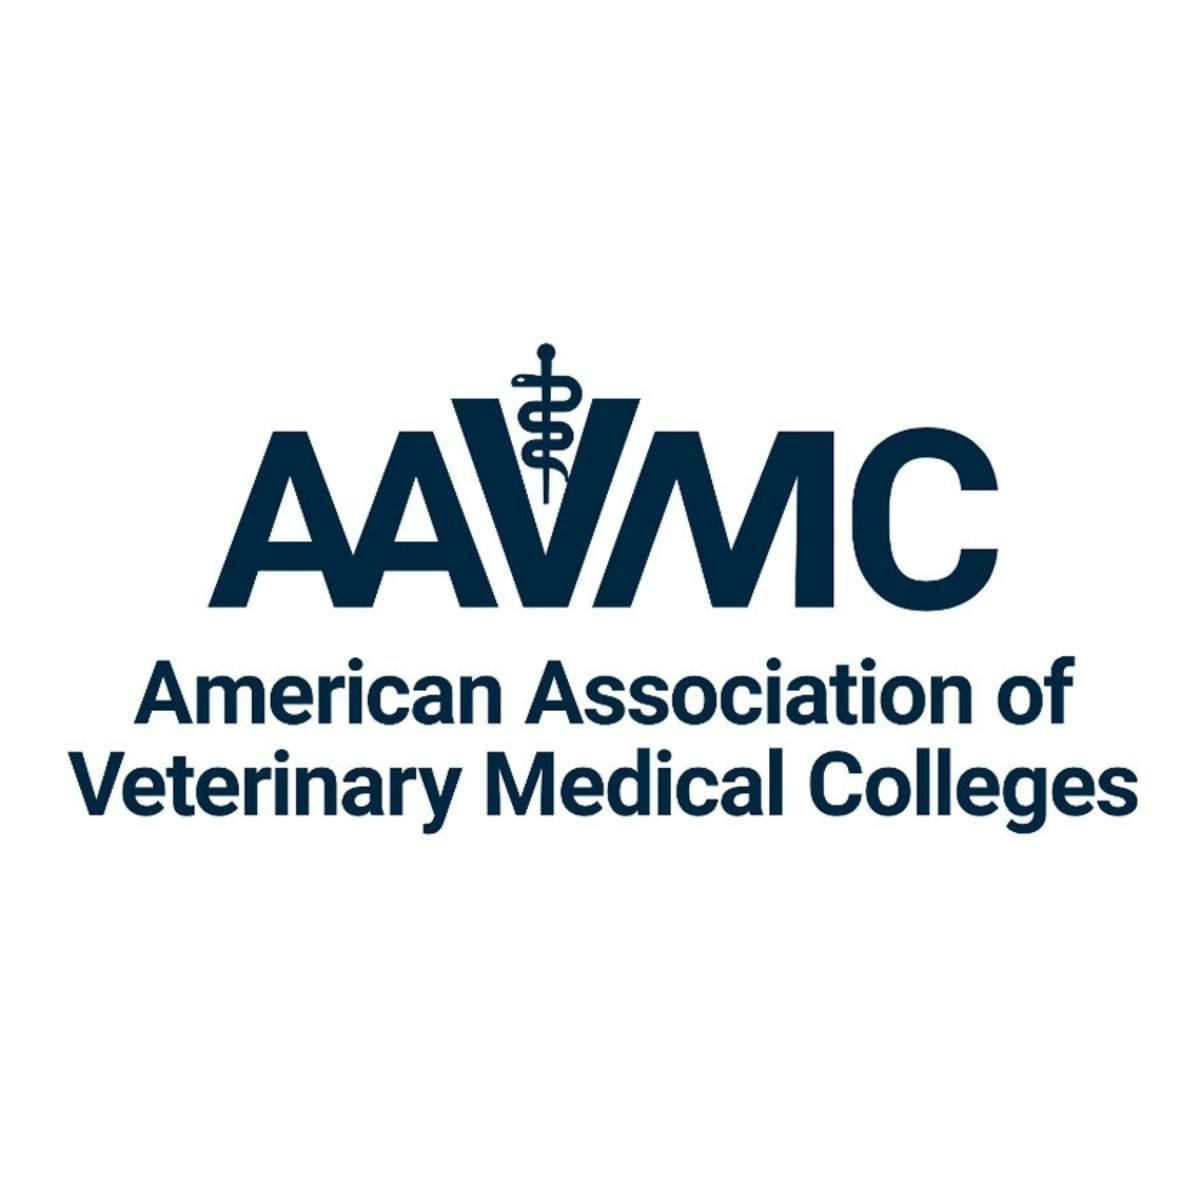 AAVMC revamps brand with new name 